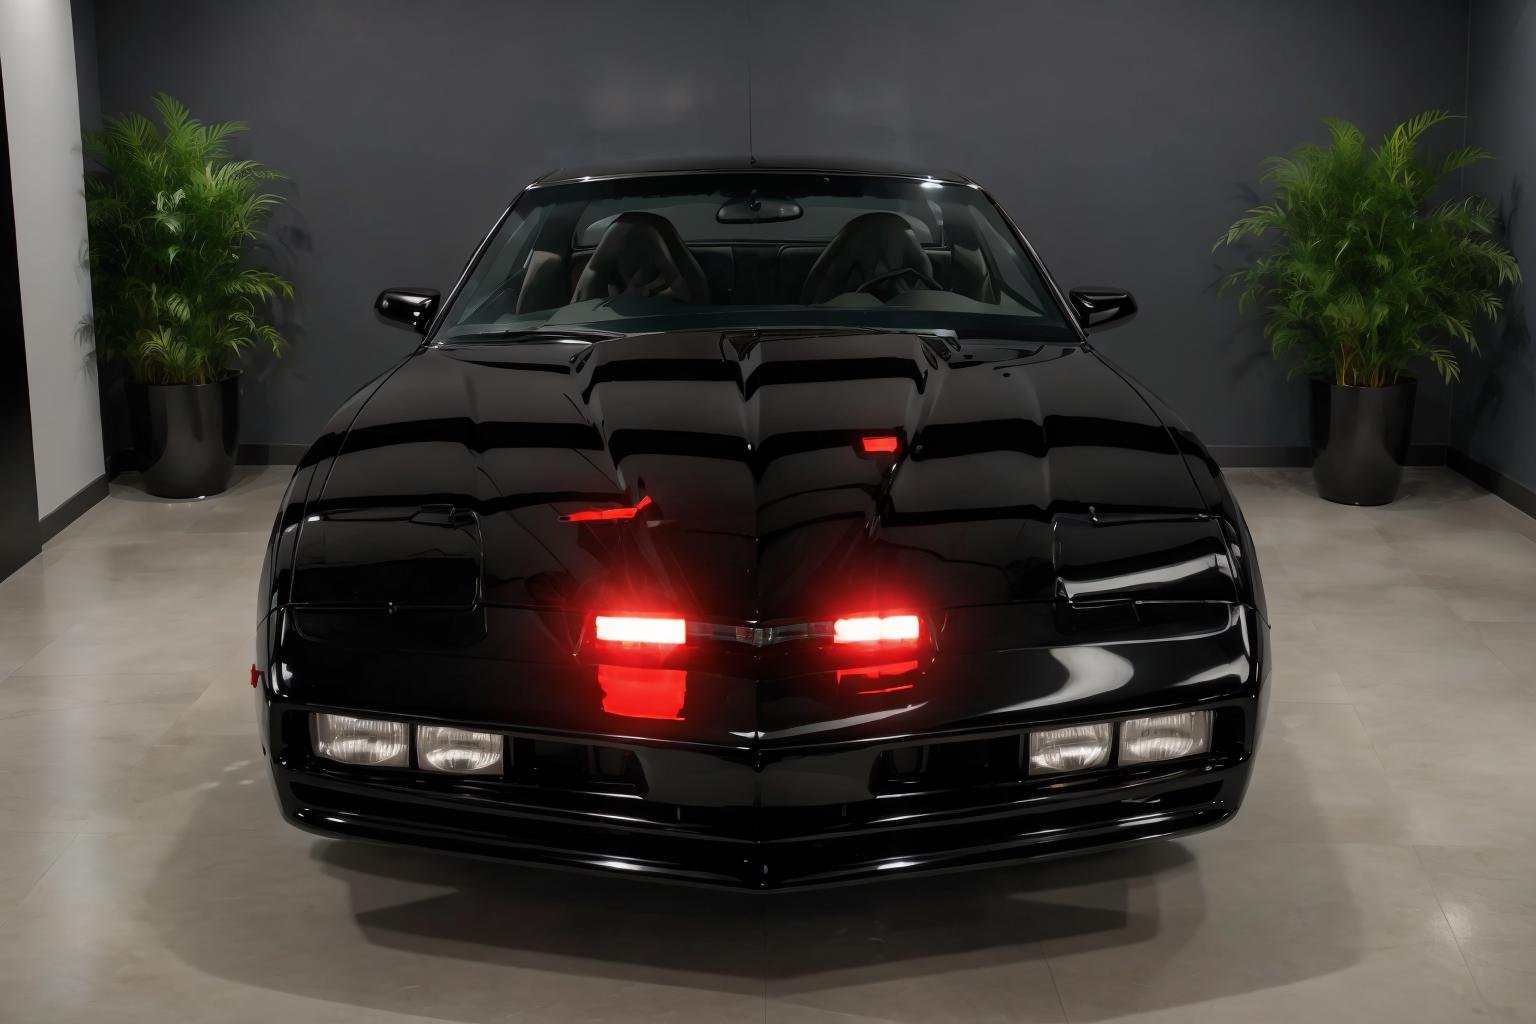 <lora:LoHa_SuperKittV2:0.7> sprkttRecreate K.I.T.T. from Knight Rider with the utmost attention to detail and in the highest possible quality. Generate an 8K-resolution image that features K.I.T.T. against a backdrop bathed in atmospheric volumetric lighting, emphasizing the car's iconic design. Strive for the highest quality and detail, ensuring that the final shot is a masterpiece that truly does justice to the legendary vehicle from Knight Rider.